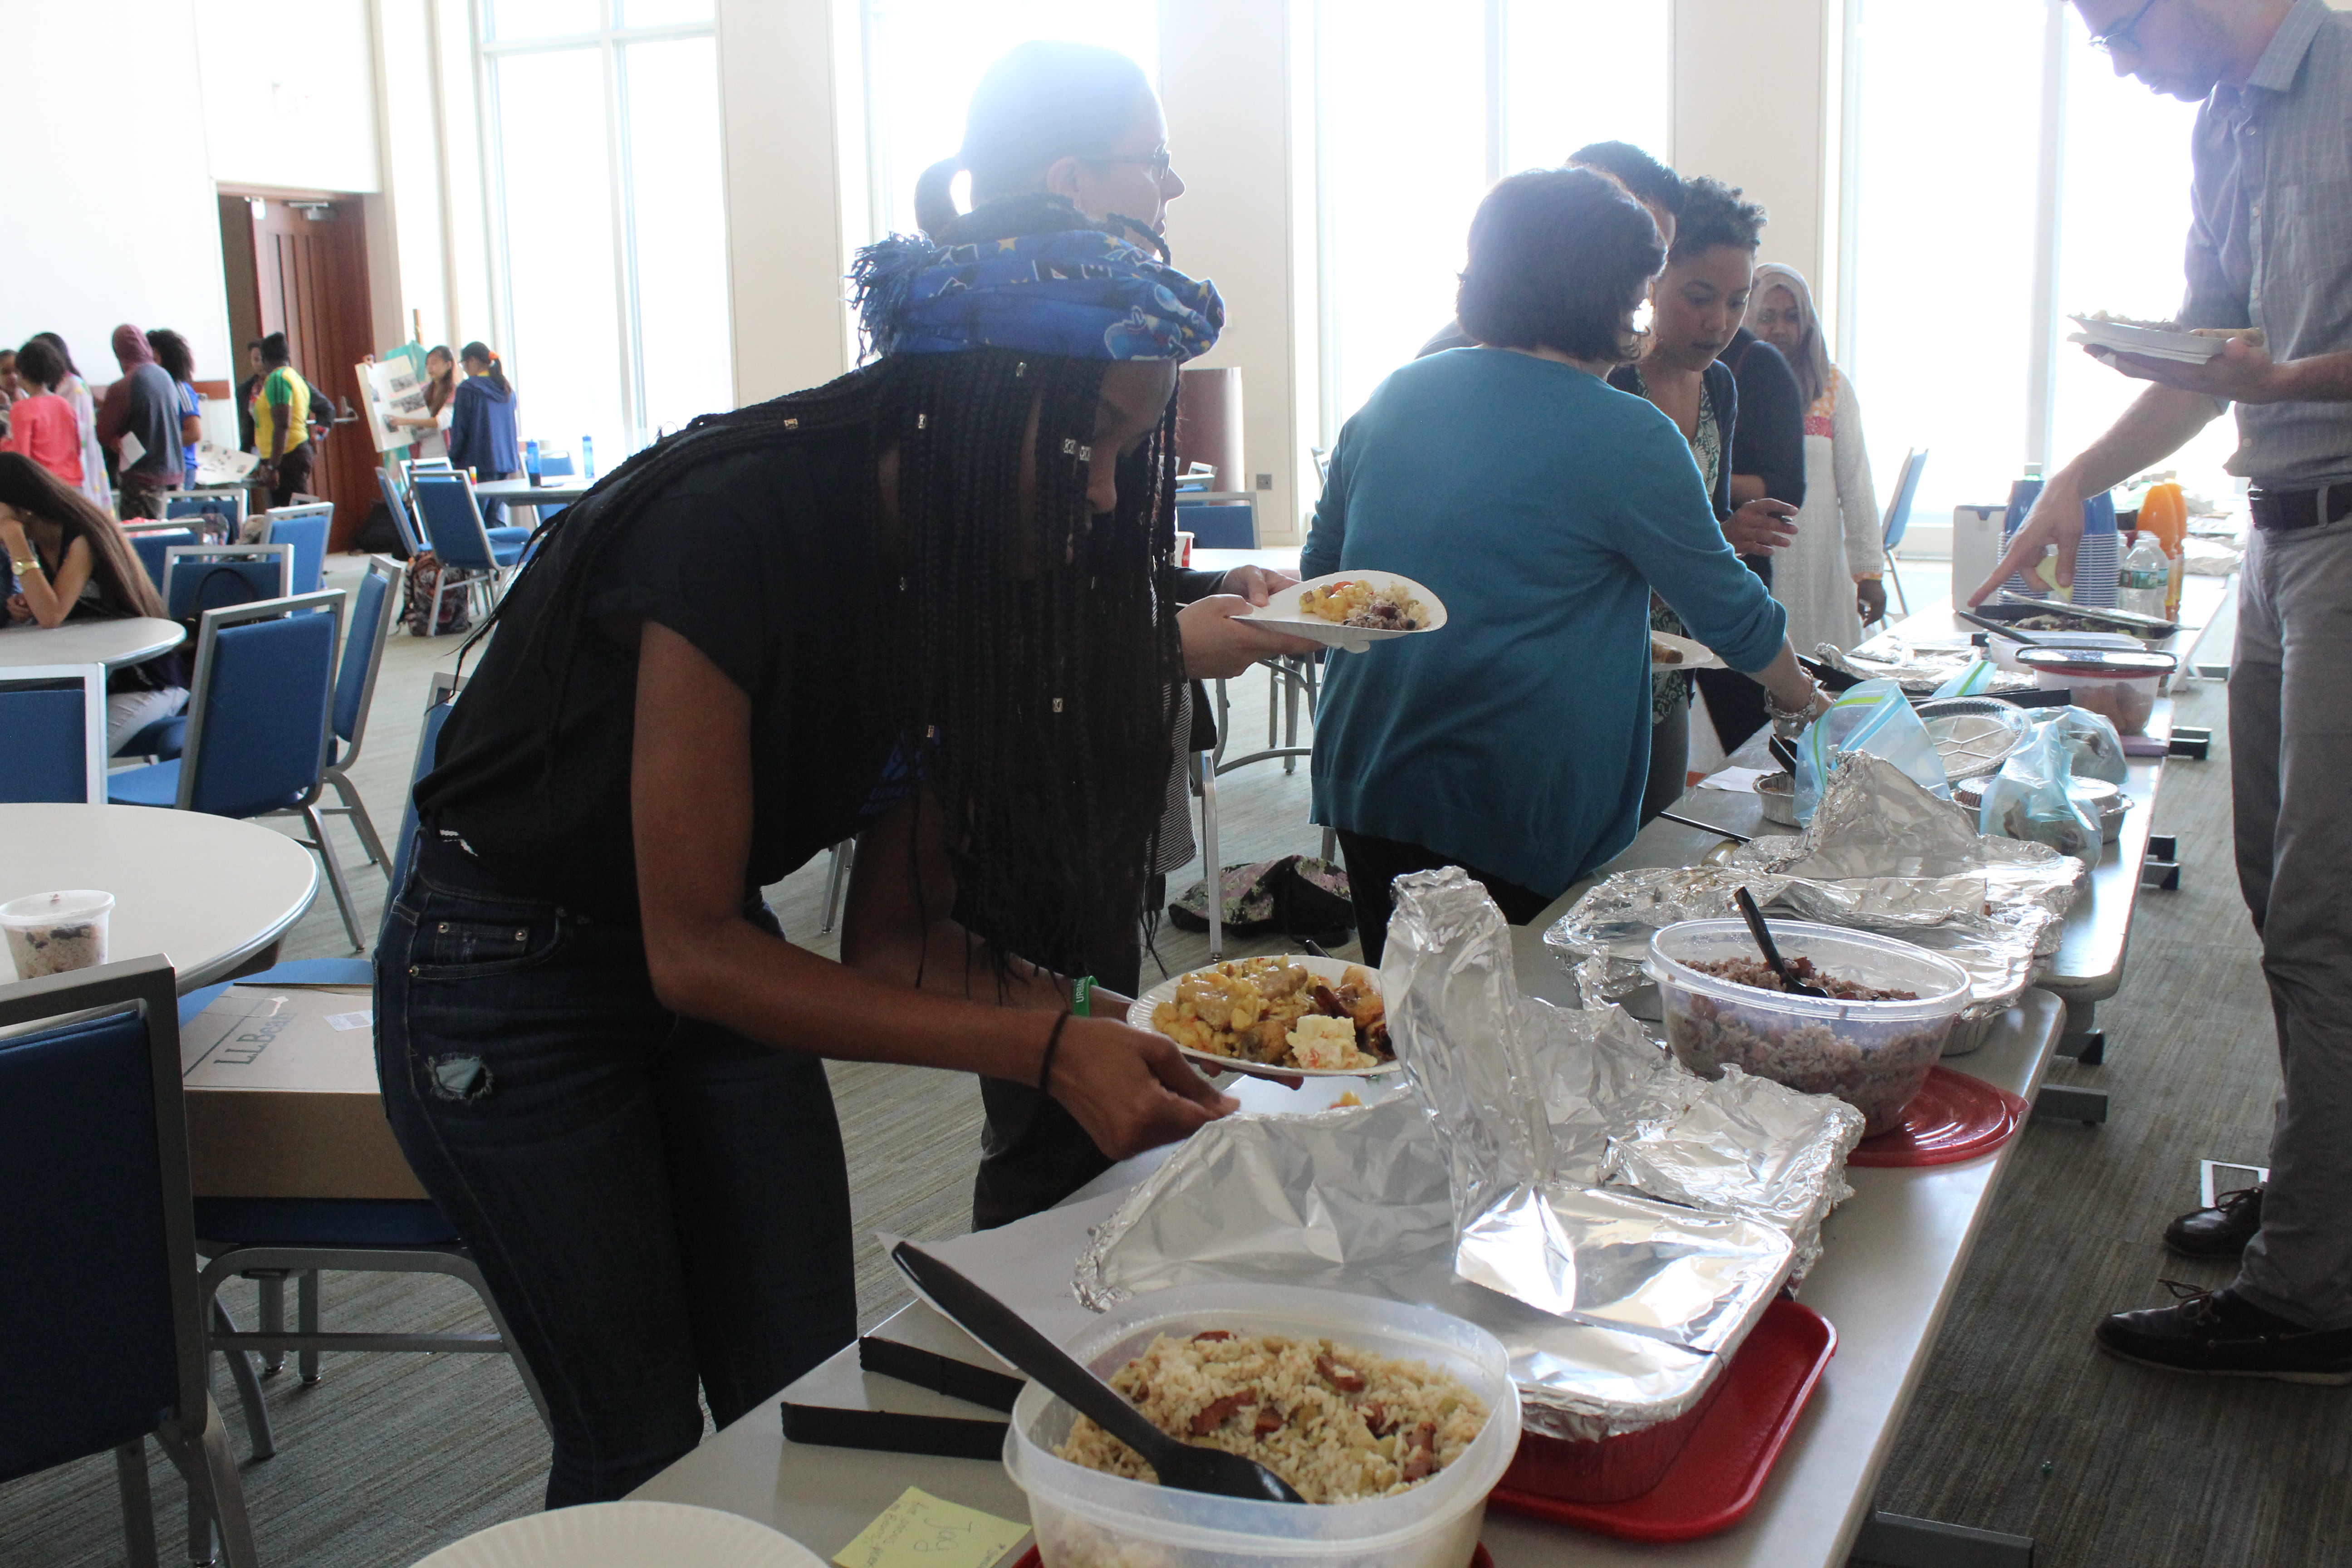 Trying out a variety of food was the best part of the Cultural Day!